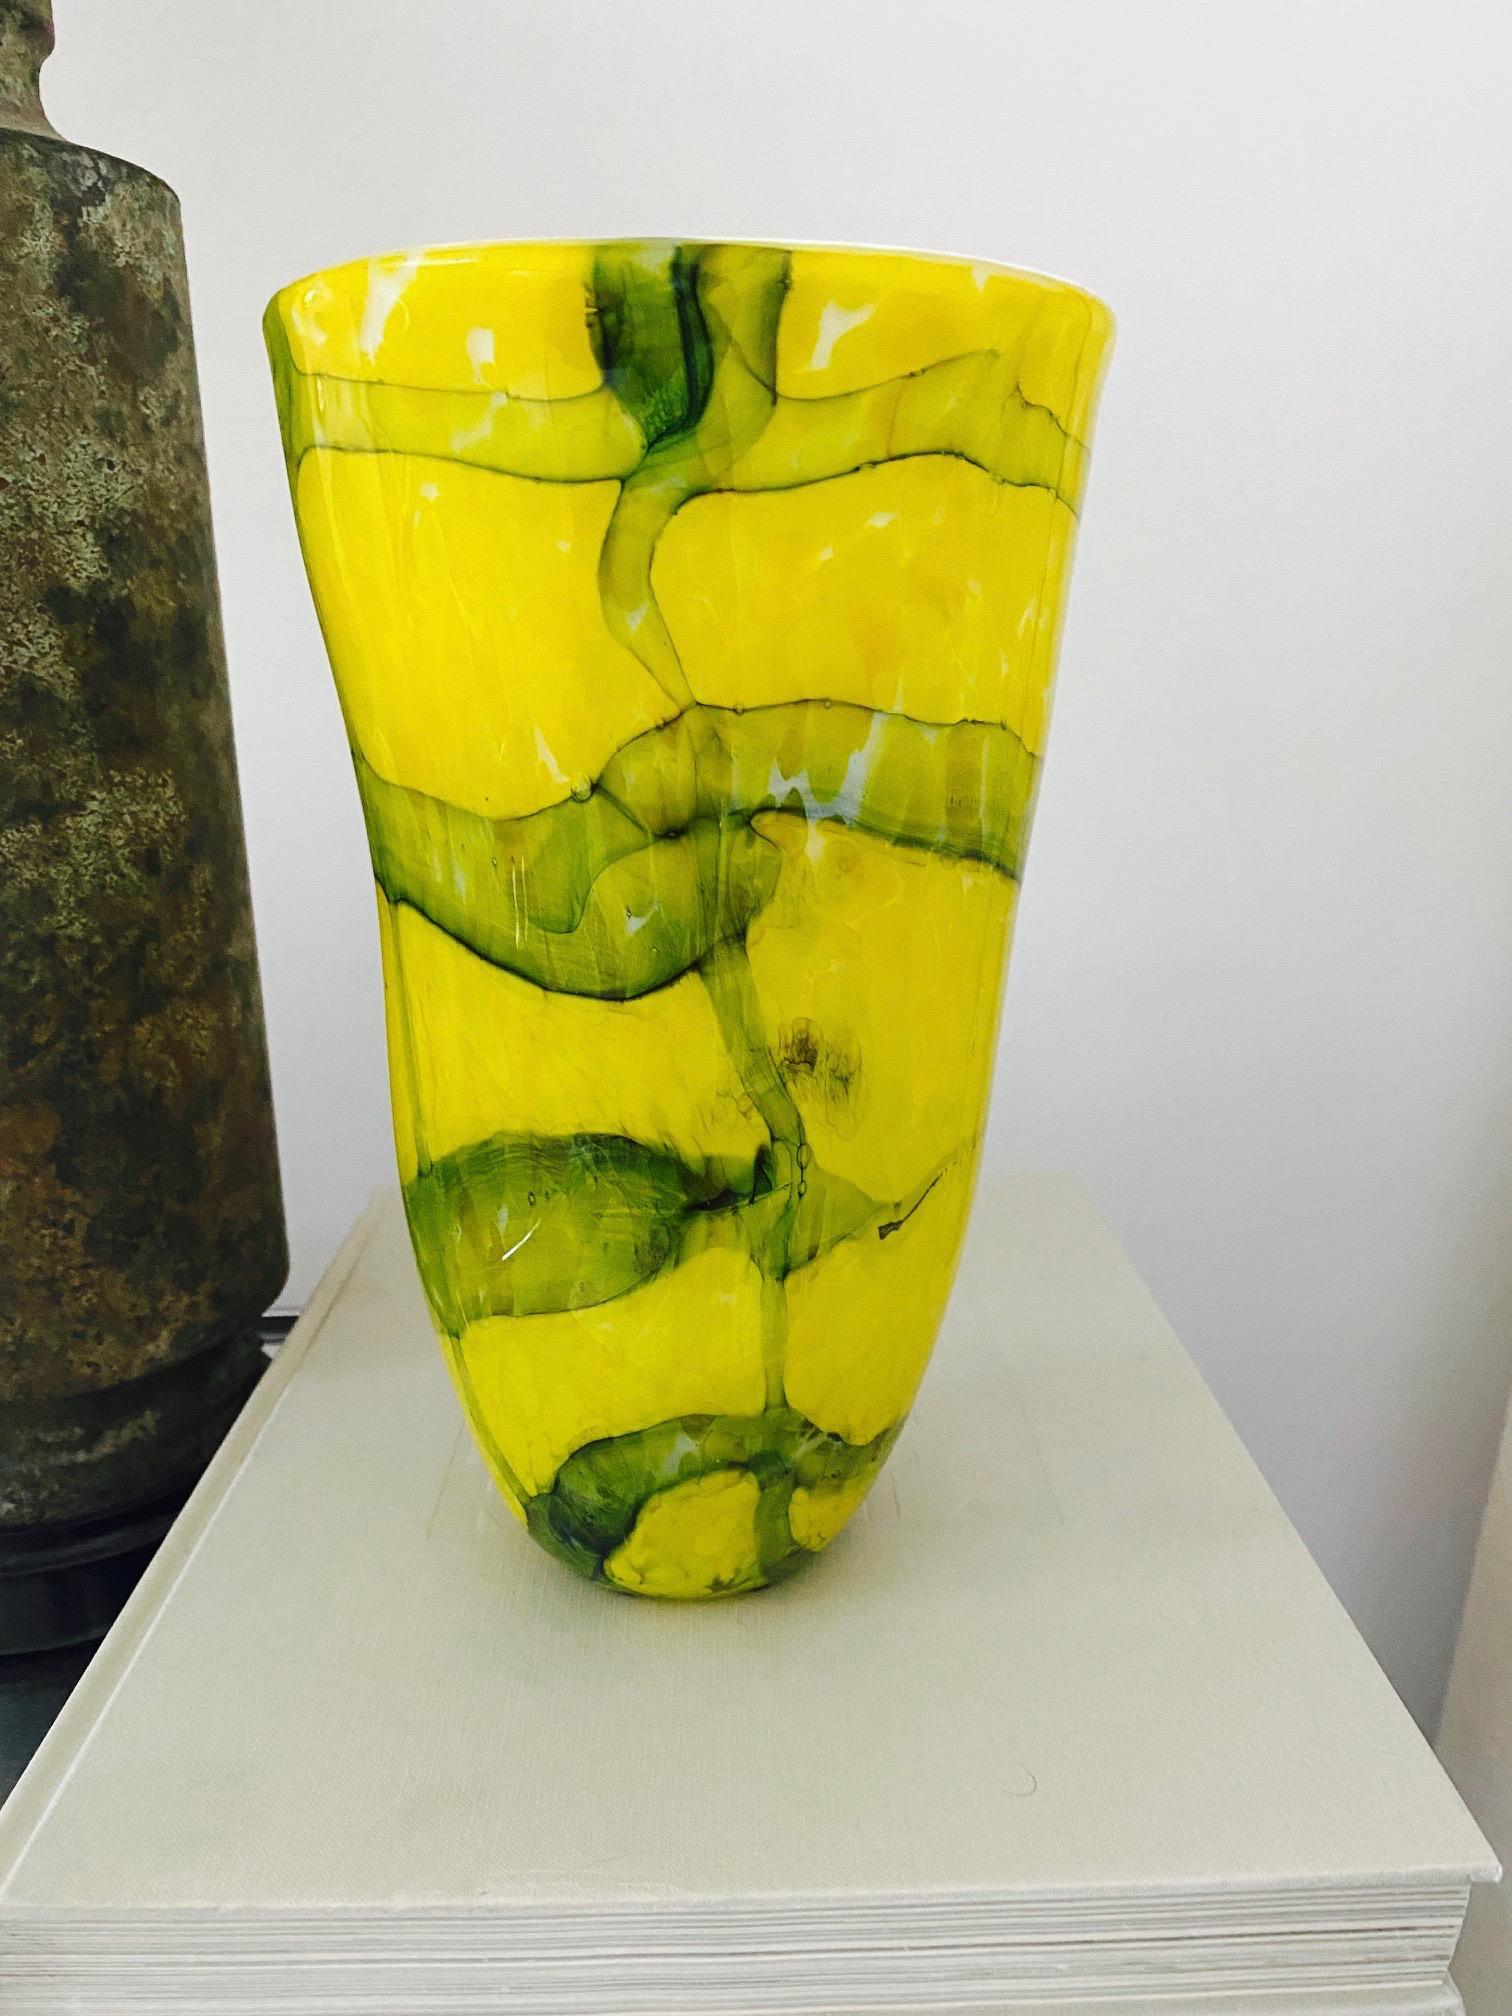 Abstract Murano Glass Vase by Fratelli Toso in Yellow and Green, c. 1980 For Sale 5